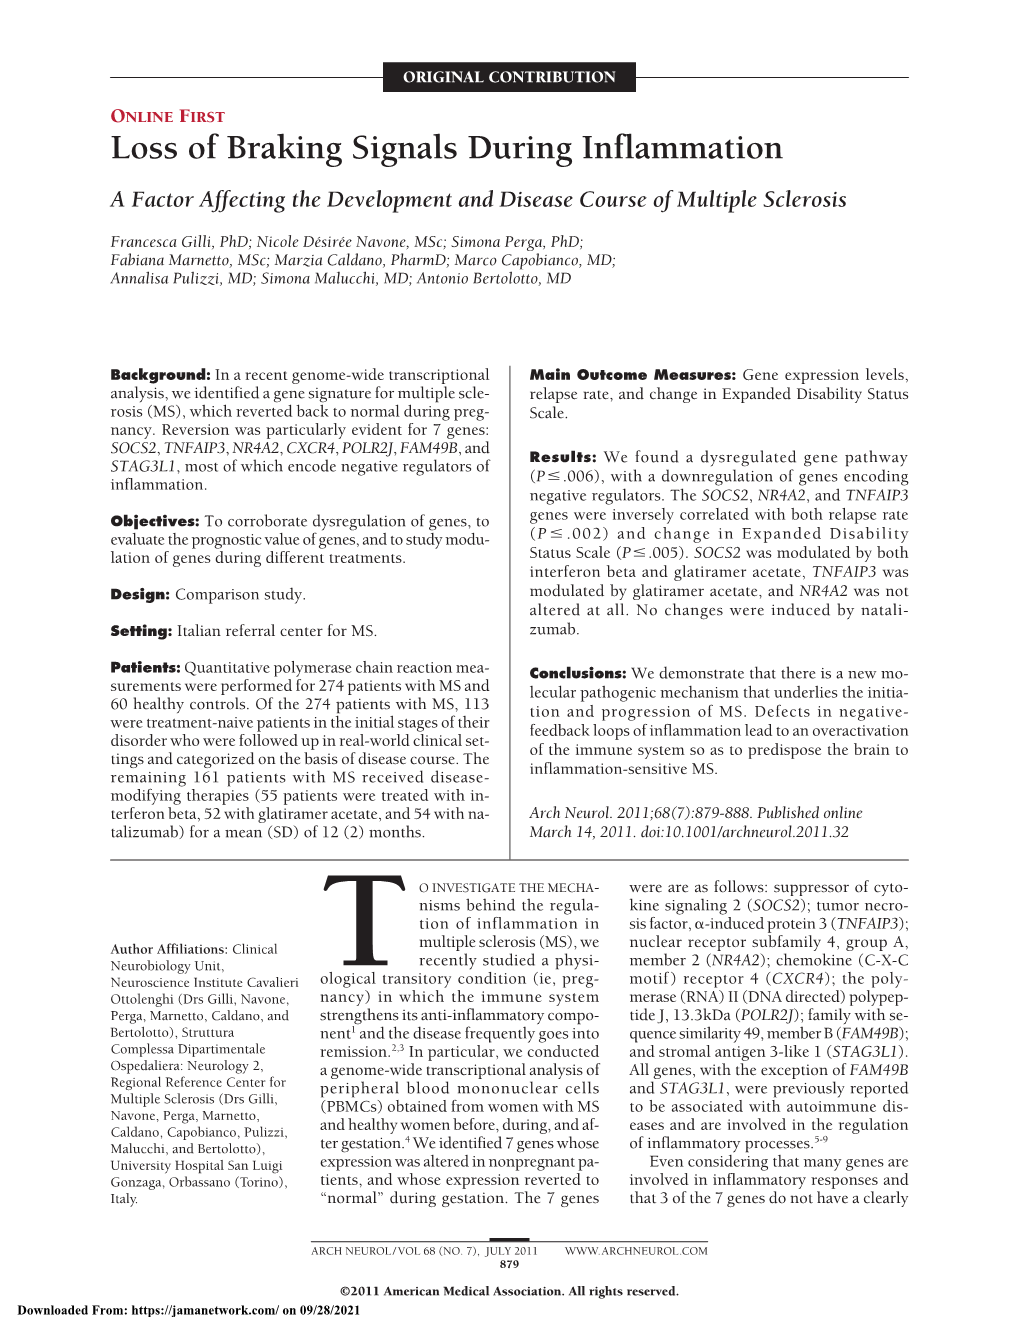 Loss of Braking Signals During Inflammation: a Factor Affecting The